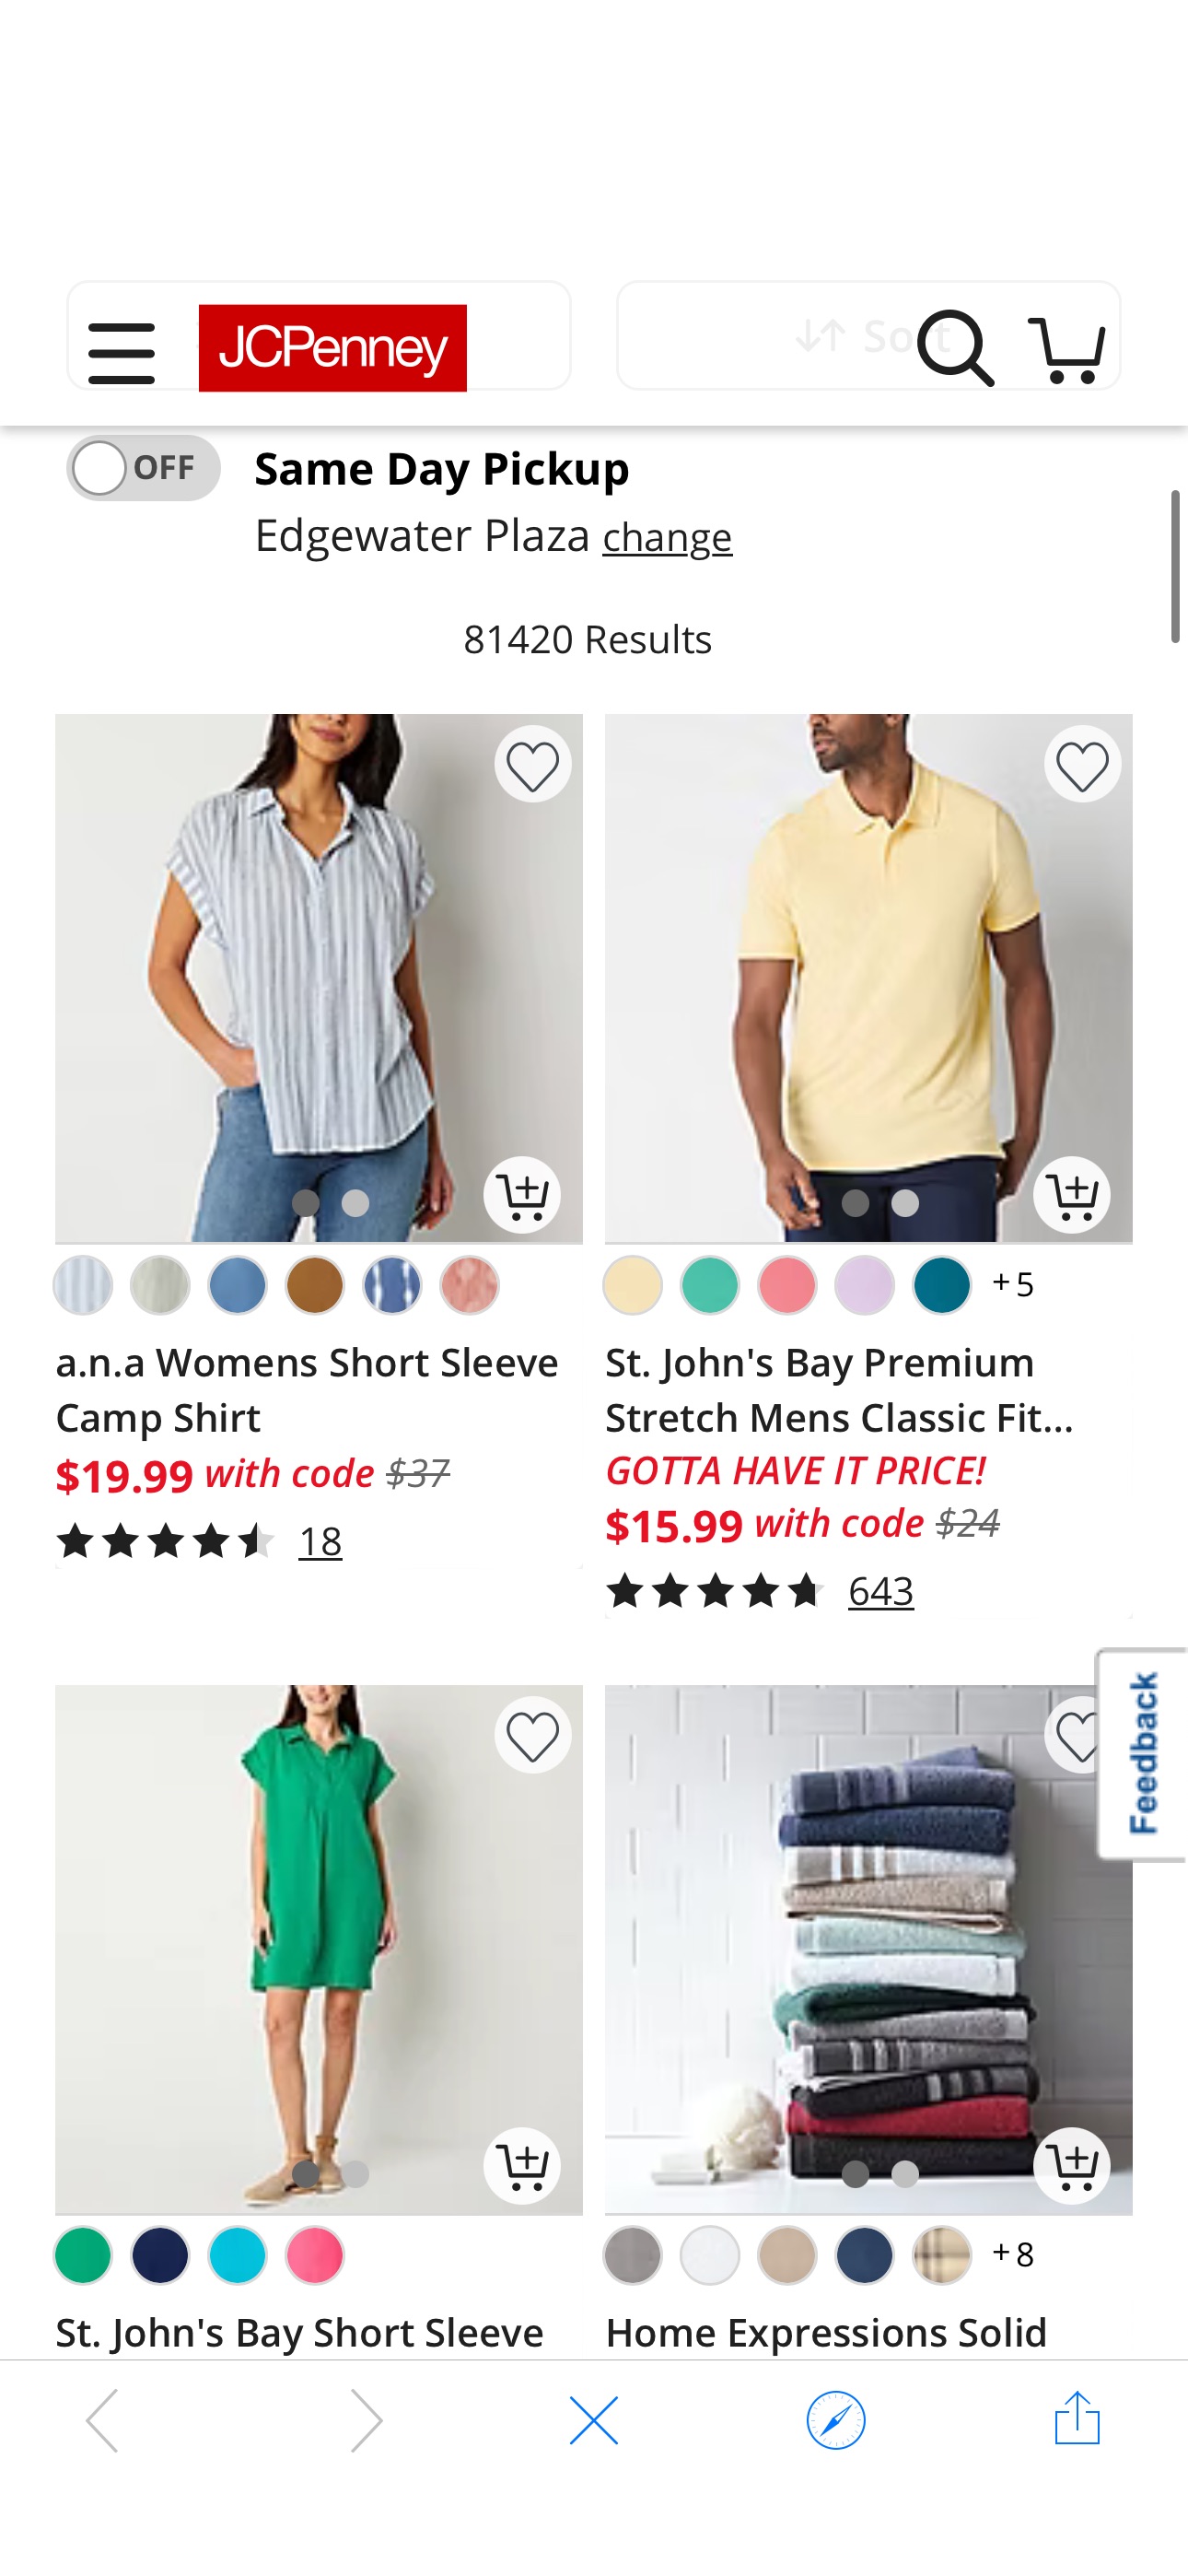 Through 4/28, save up to 20% on apparel, home, beauty, and more at JCPenney during their Big Brands Event when you apply the promo code COOKOUTS during checkout.